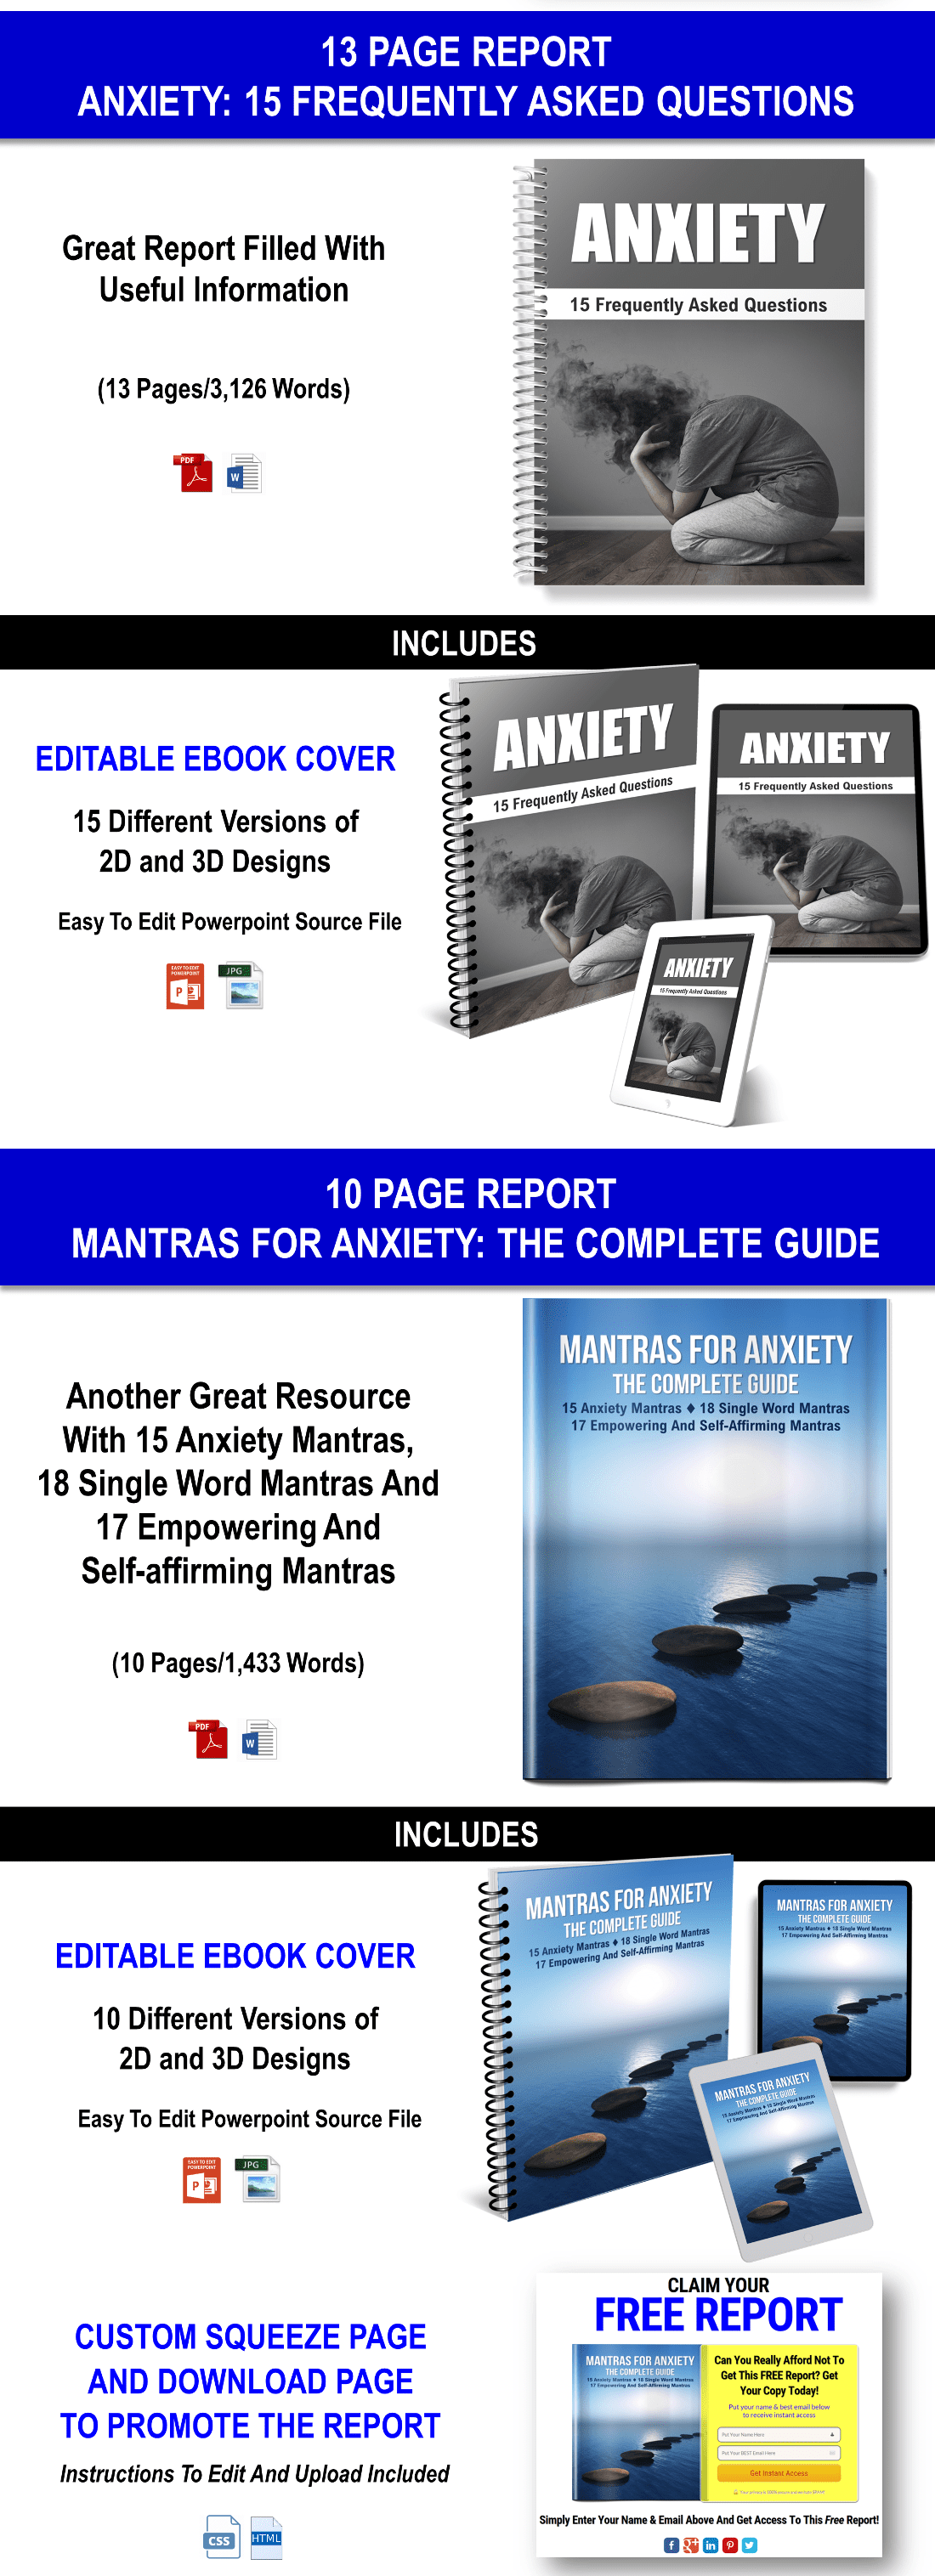 THE SELF HELP PATH FOR ANXIETY - 340 POSITIVE AFFIRMATIONS, GUIDED MEDITATIONS AND CALMING PROGRAMS Giant Content Pack with PLR Rights